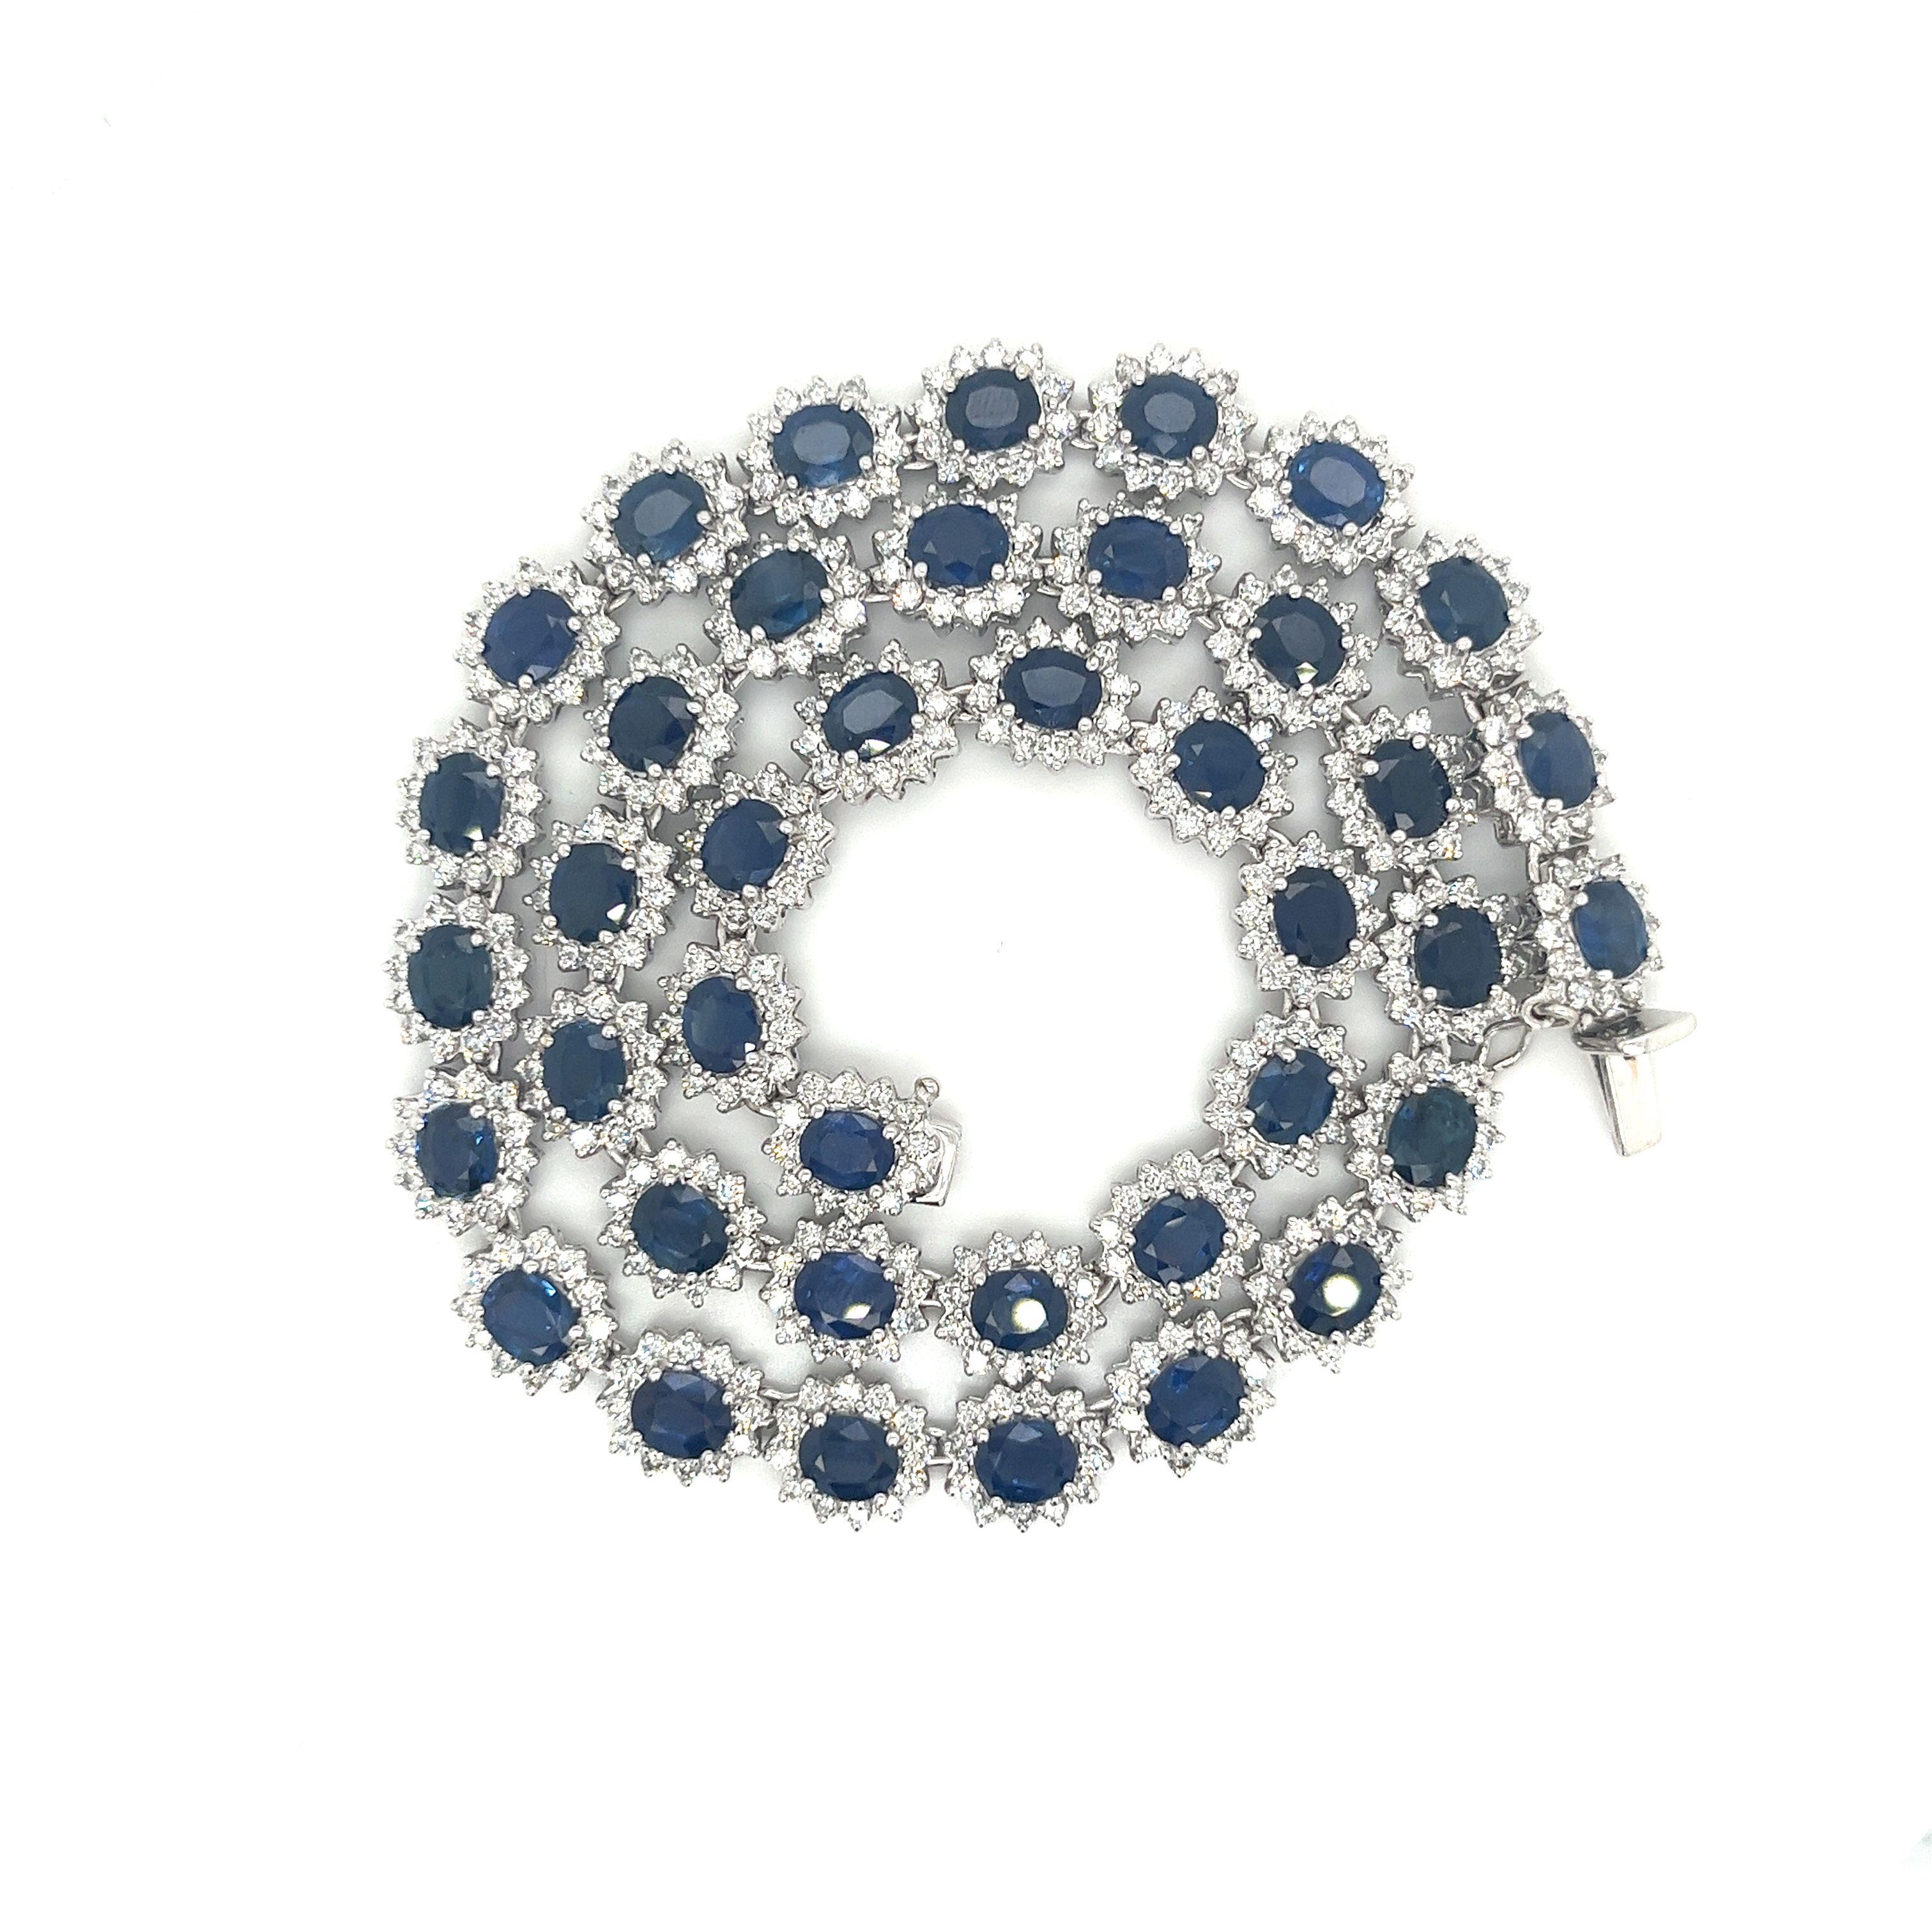 36 Carat Oval Cut Blue Sapphire & Diamond Halo Choker Necklace in 18k White Gold For Sale 1